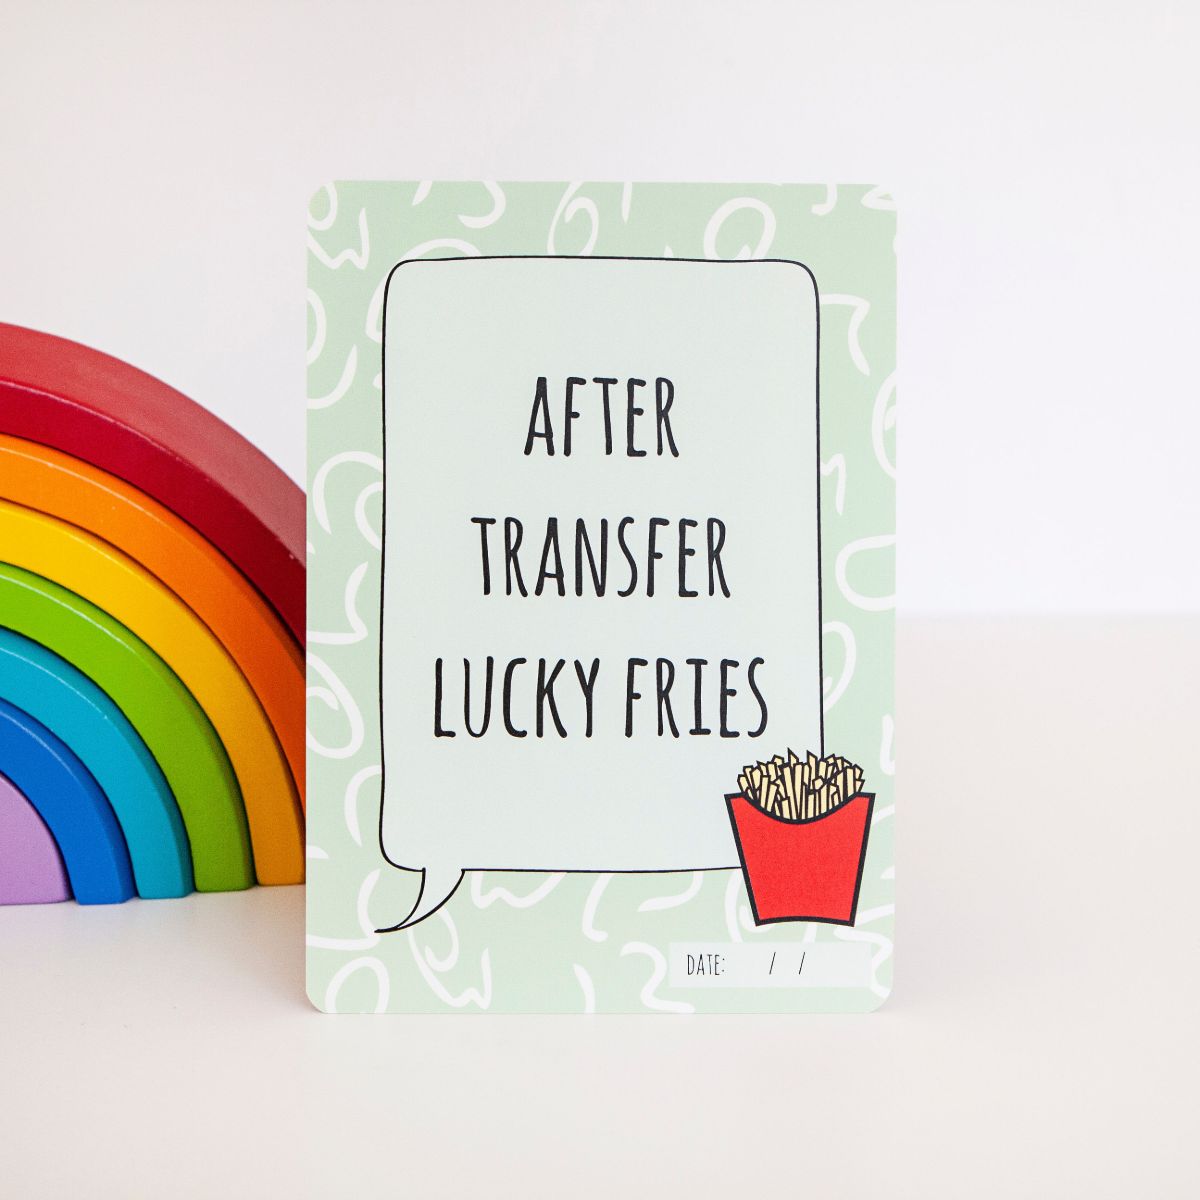 lucky-fries-after-ivf-transfer-fertility-treatment